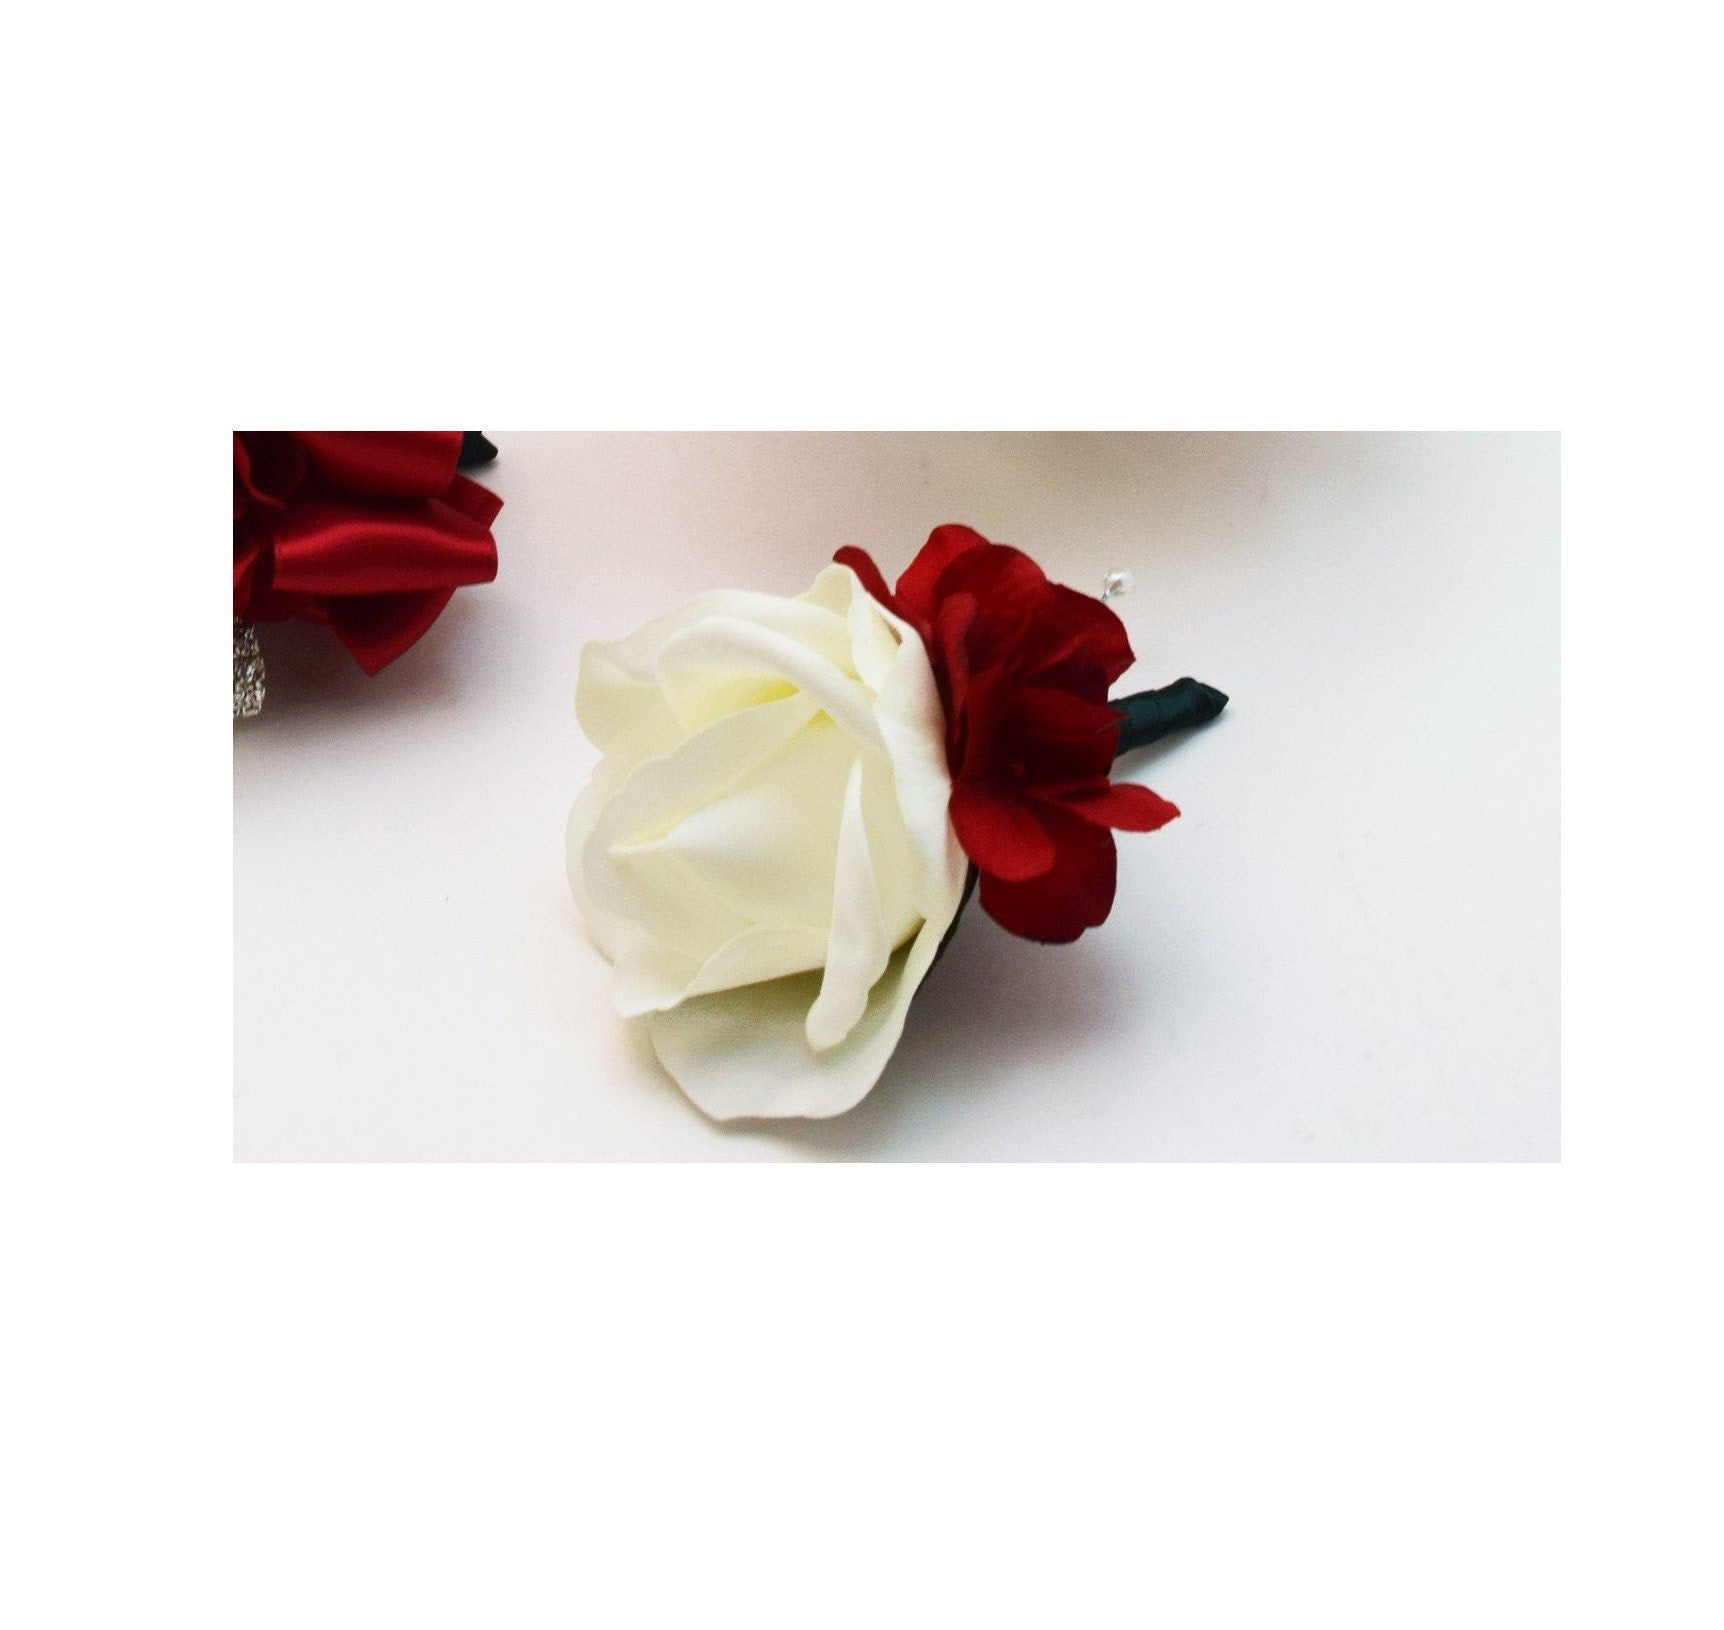 White Roses Red Calla Lily Rhinestone Bridal or Bridesmaid Prom Bouquet - add Groom Boutonniere Flower Crown Wedding Arch Centerpiece & More